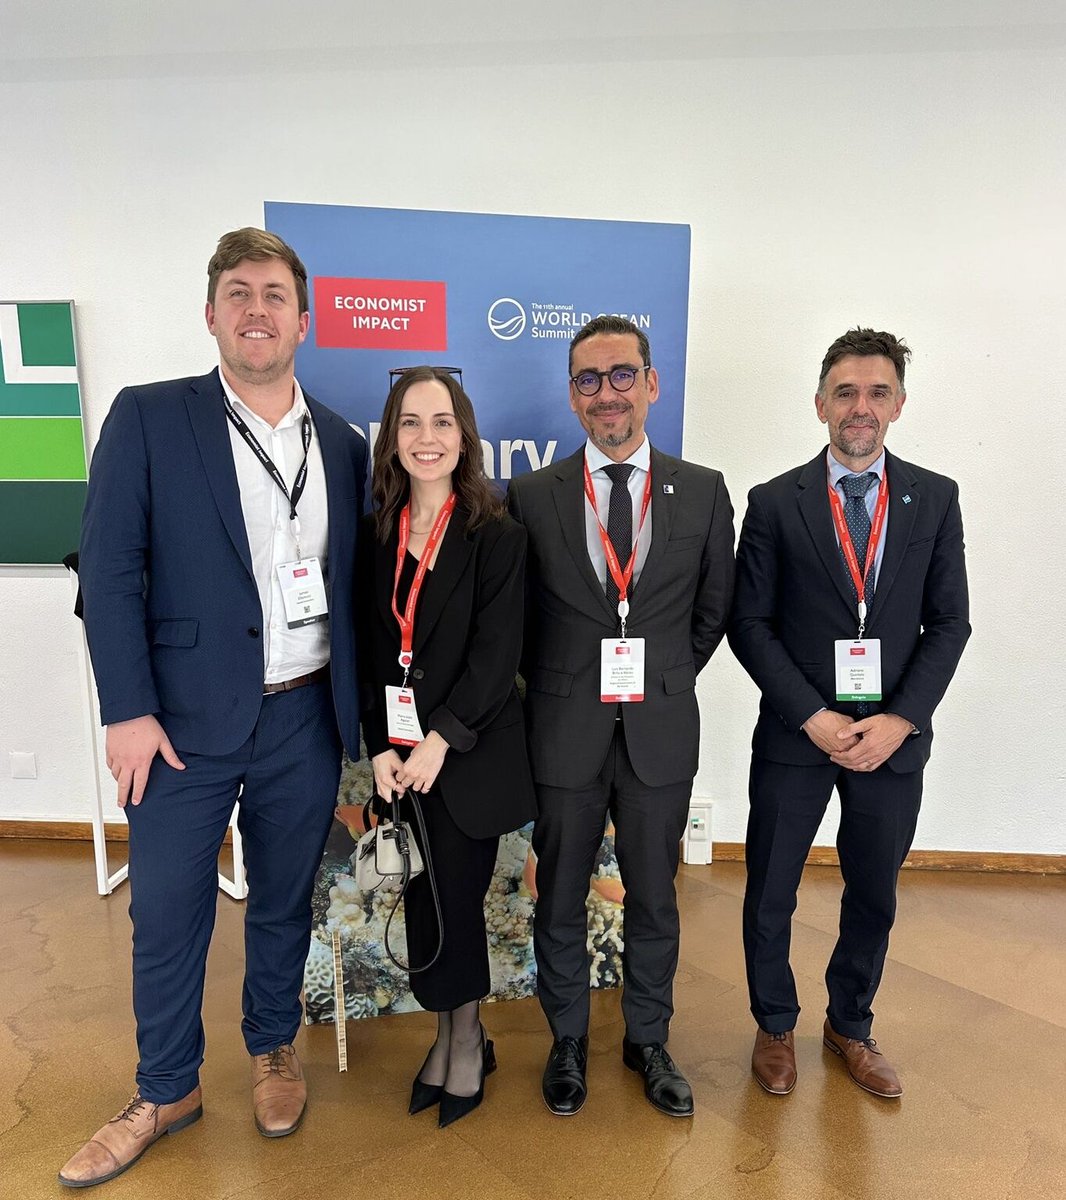 Had the pleasure of connecting with incredible individuals shaping the future of #oceansustainability at the World #OceanSummit yesterday! 🌊
Met with @AdrianoQuintel1 & Mariana Andrade from Blue Azores, with Luis Bernardo Brito e Abreu from the Regional Government of the Azores